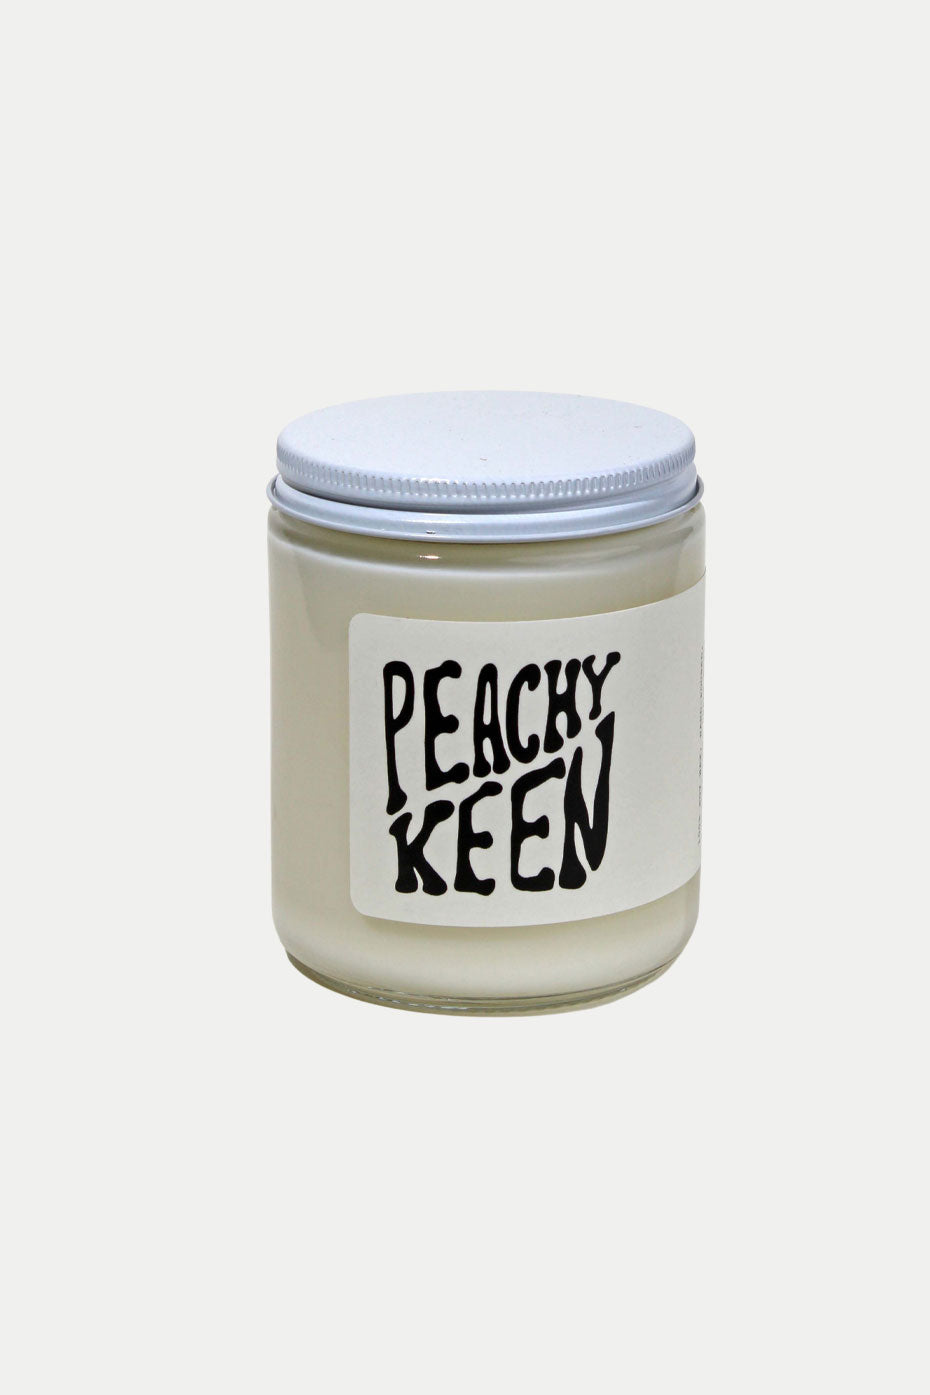 MOCO Candles Peachy Keen Soy Candle